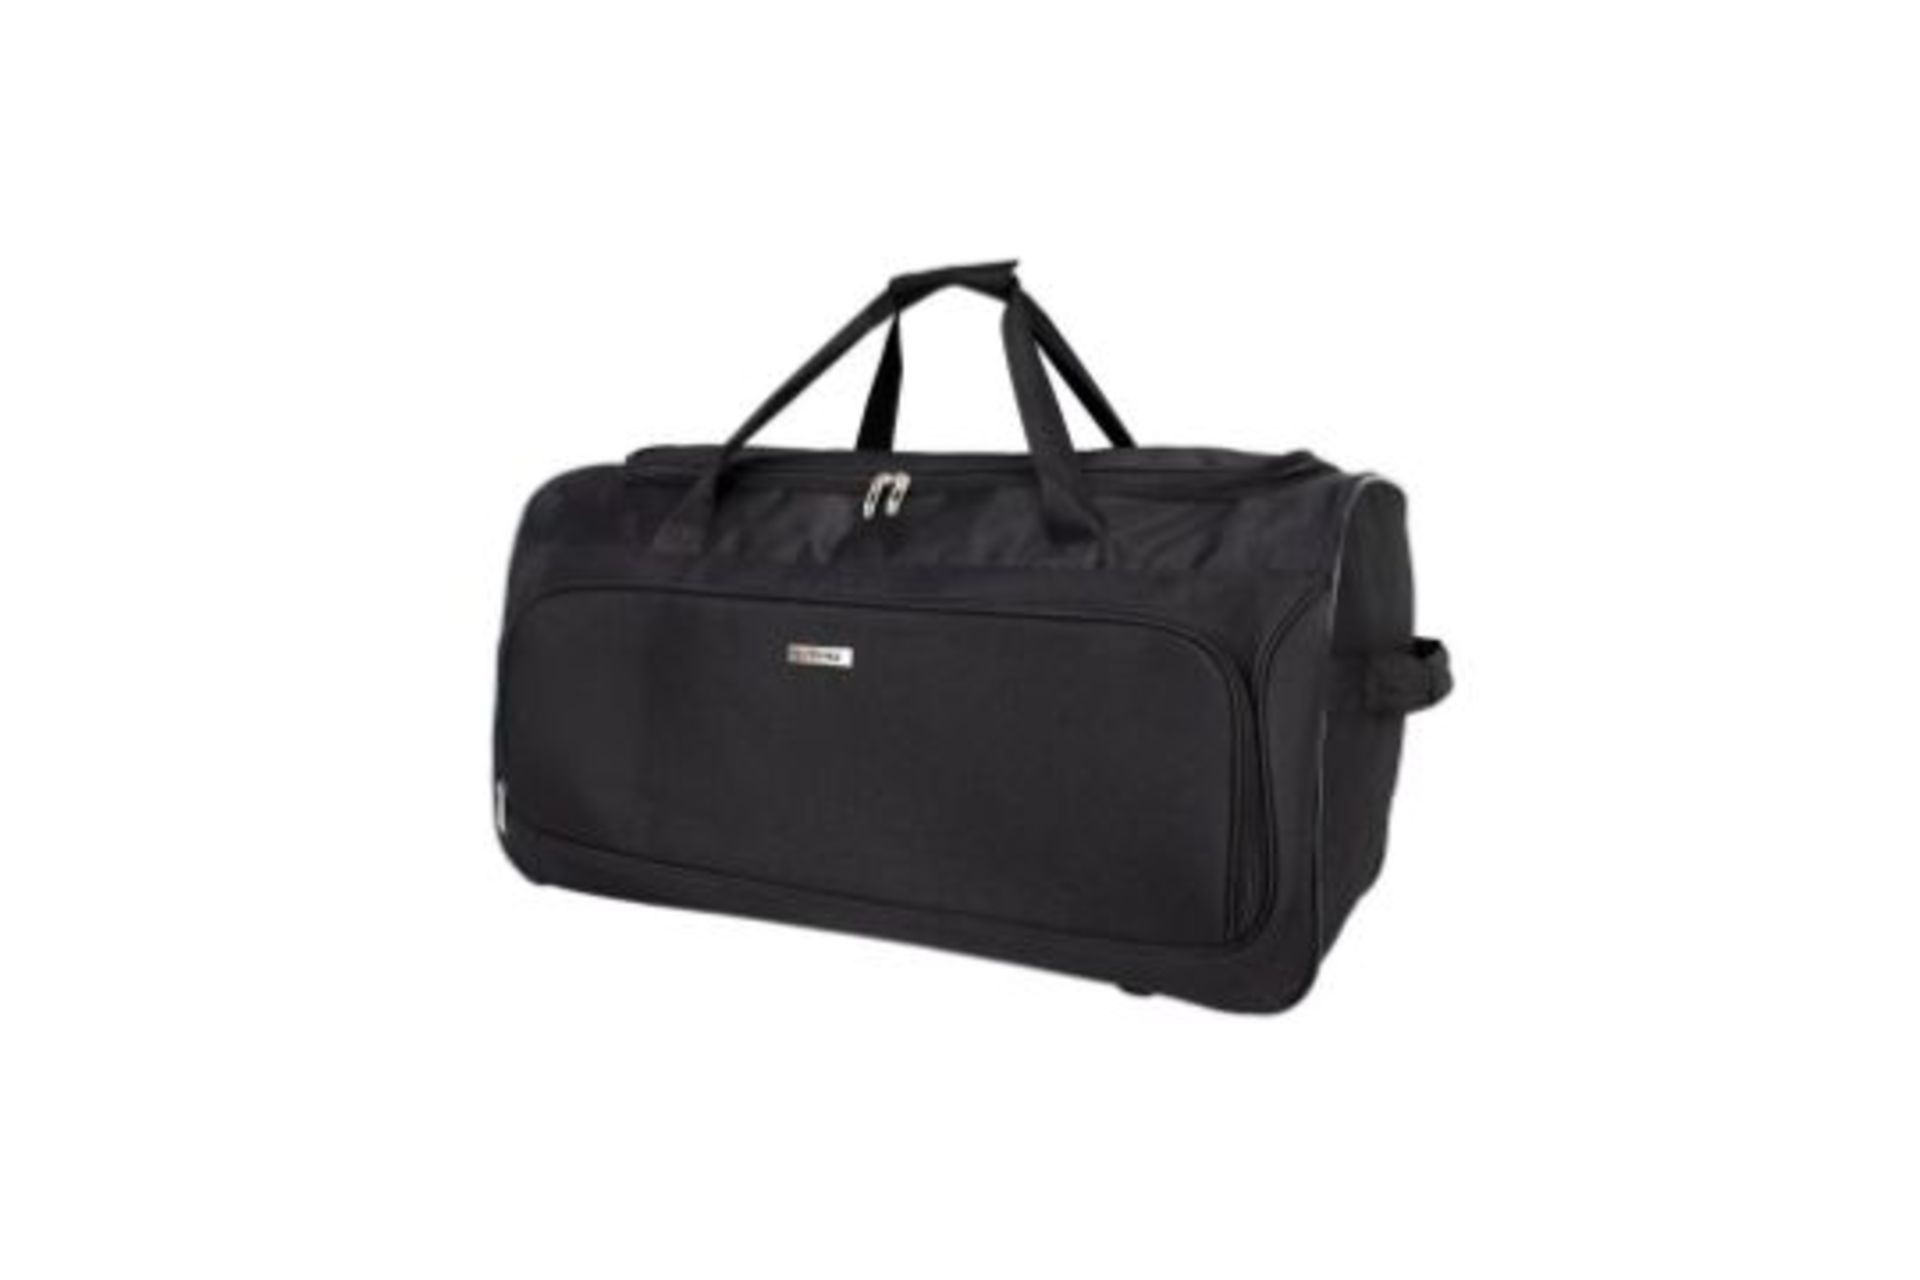 12 x Brand New Set OF TAG Ridgefield Black 5 Piece Softside Luggage Set. RRP $300. This classic - Image 3 of 5